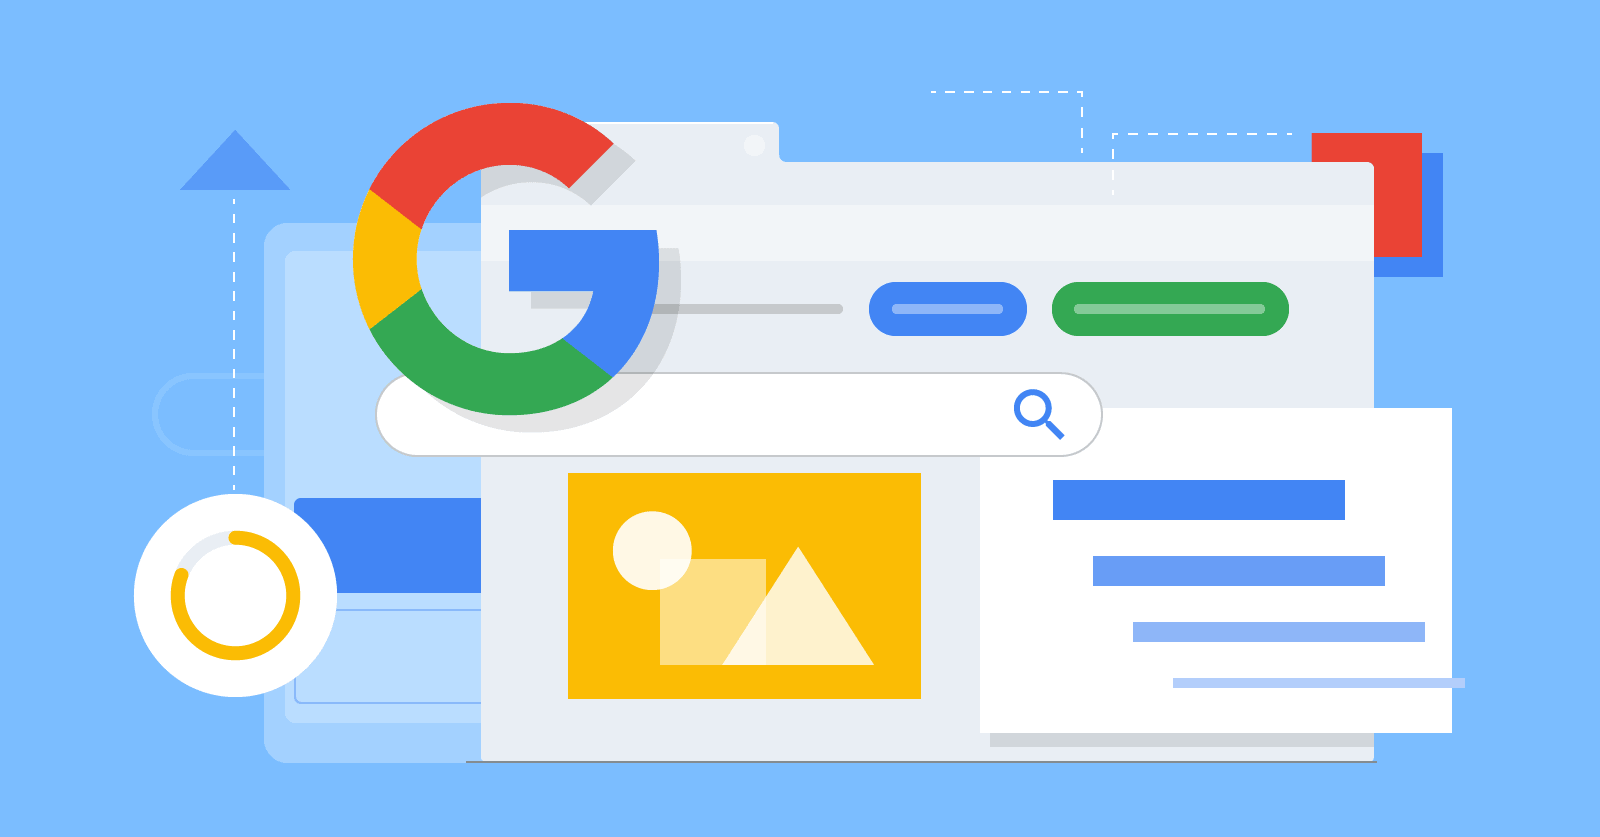 How to Rank Your Website in Google